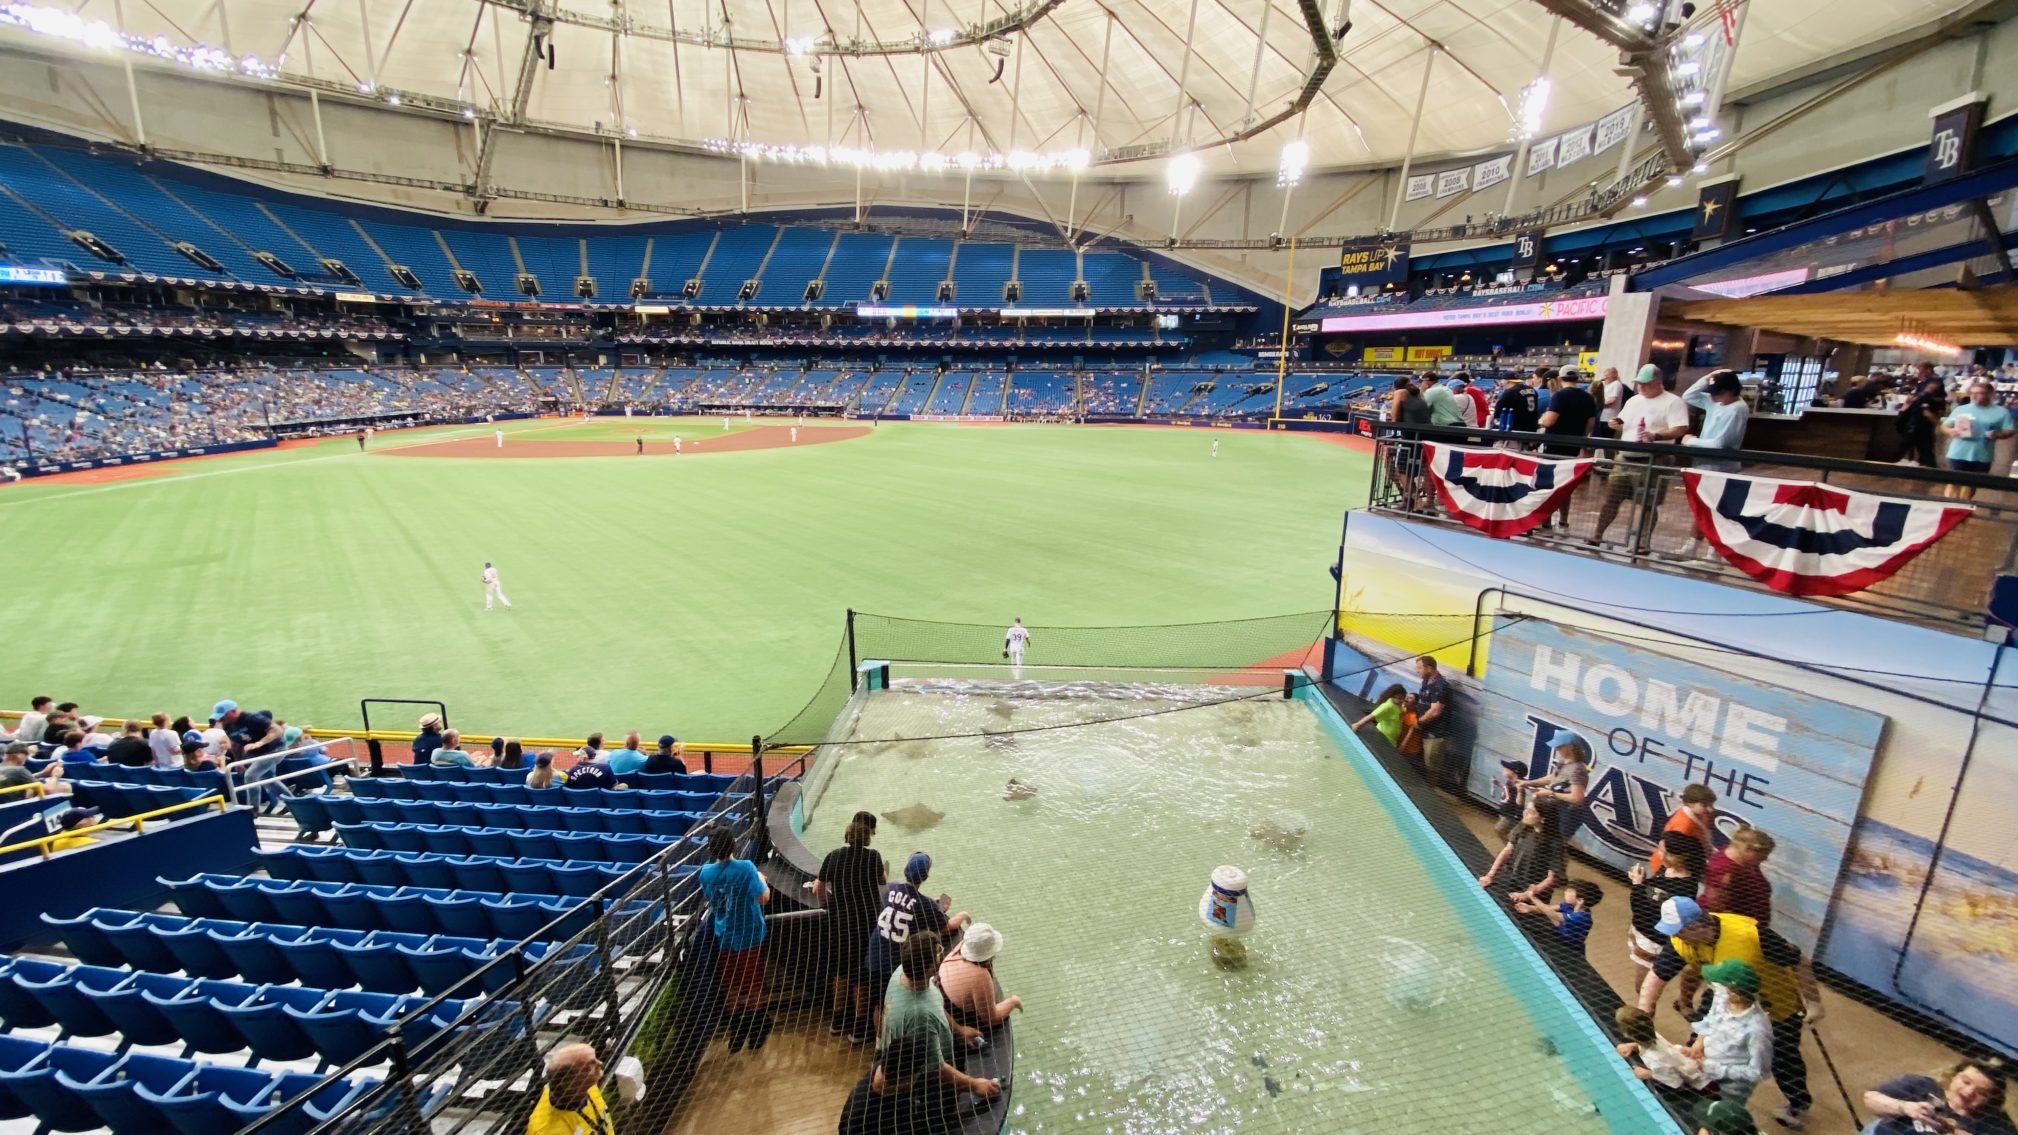 Touching the Rays at Tropicana Field, Florida